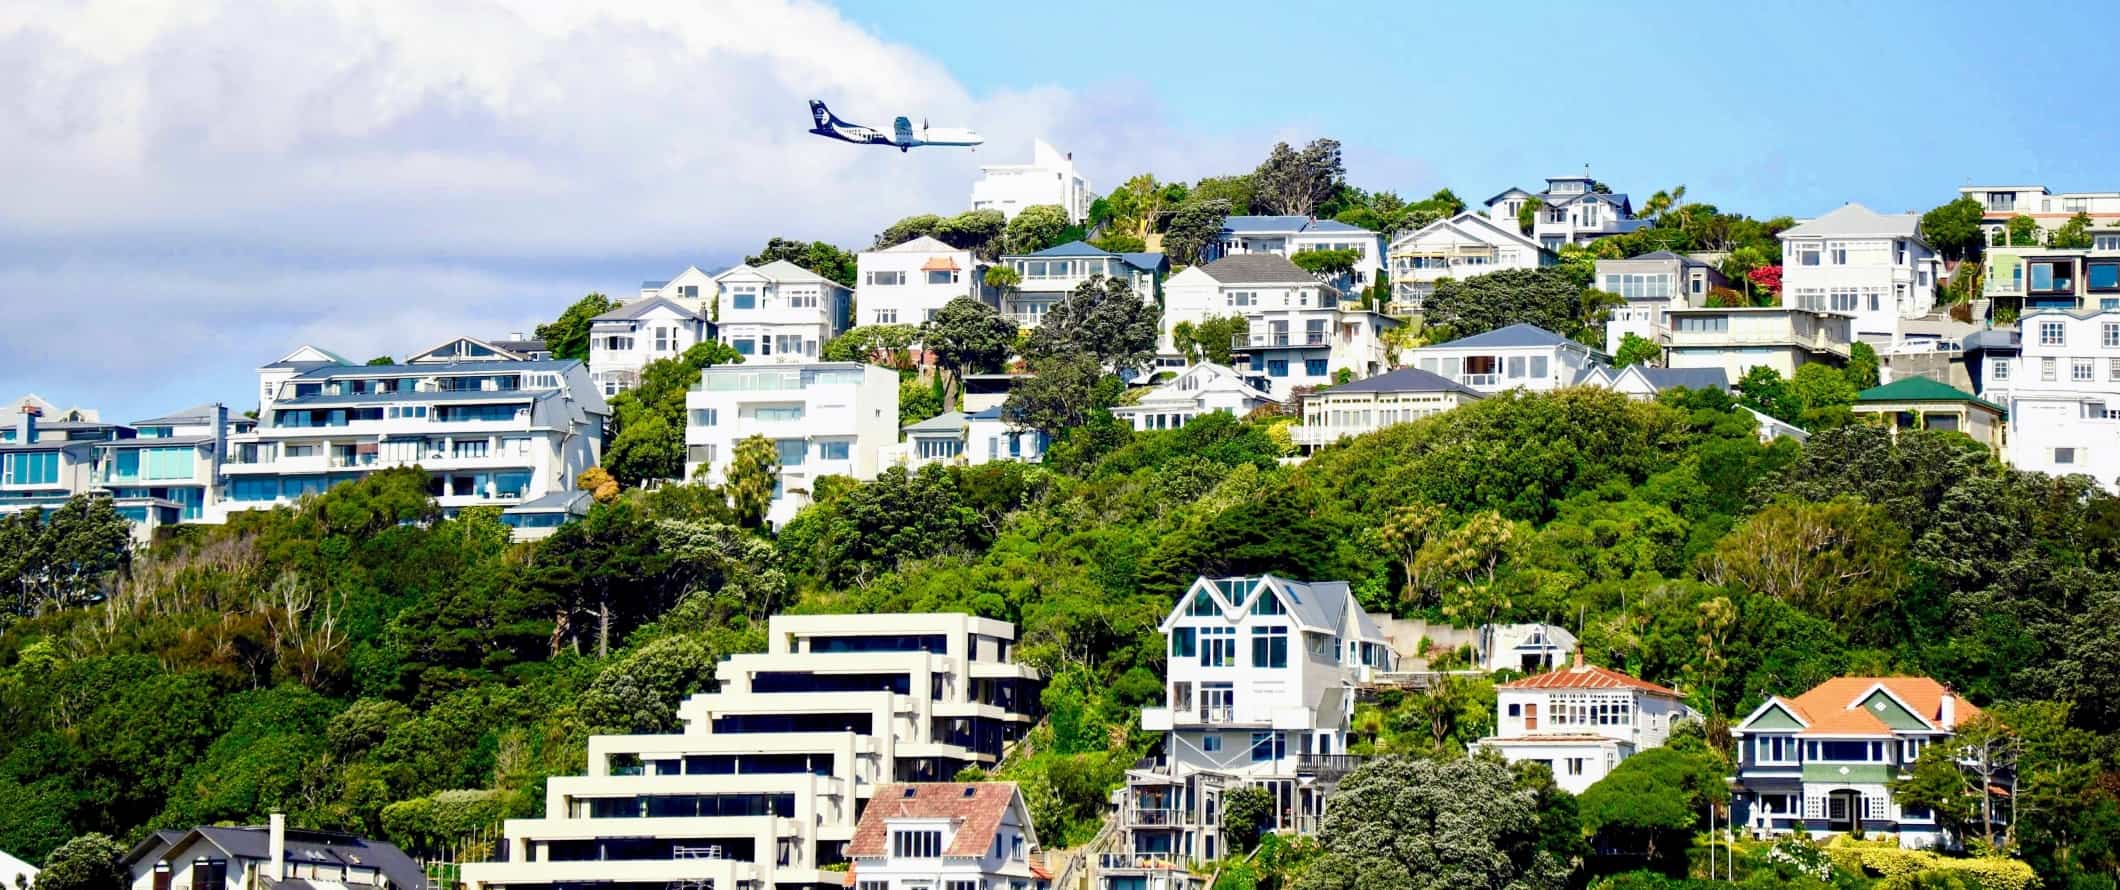 Many houses set into a lush green hillside, with an airplane flying overhead in Wellington, New Zealand.